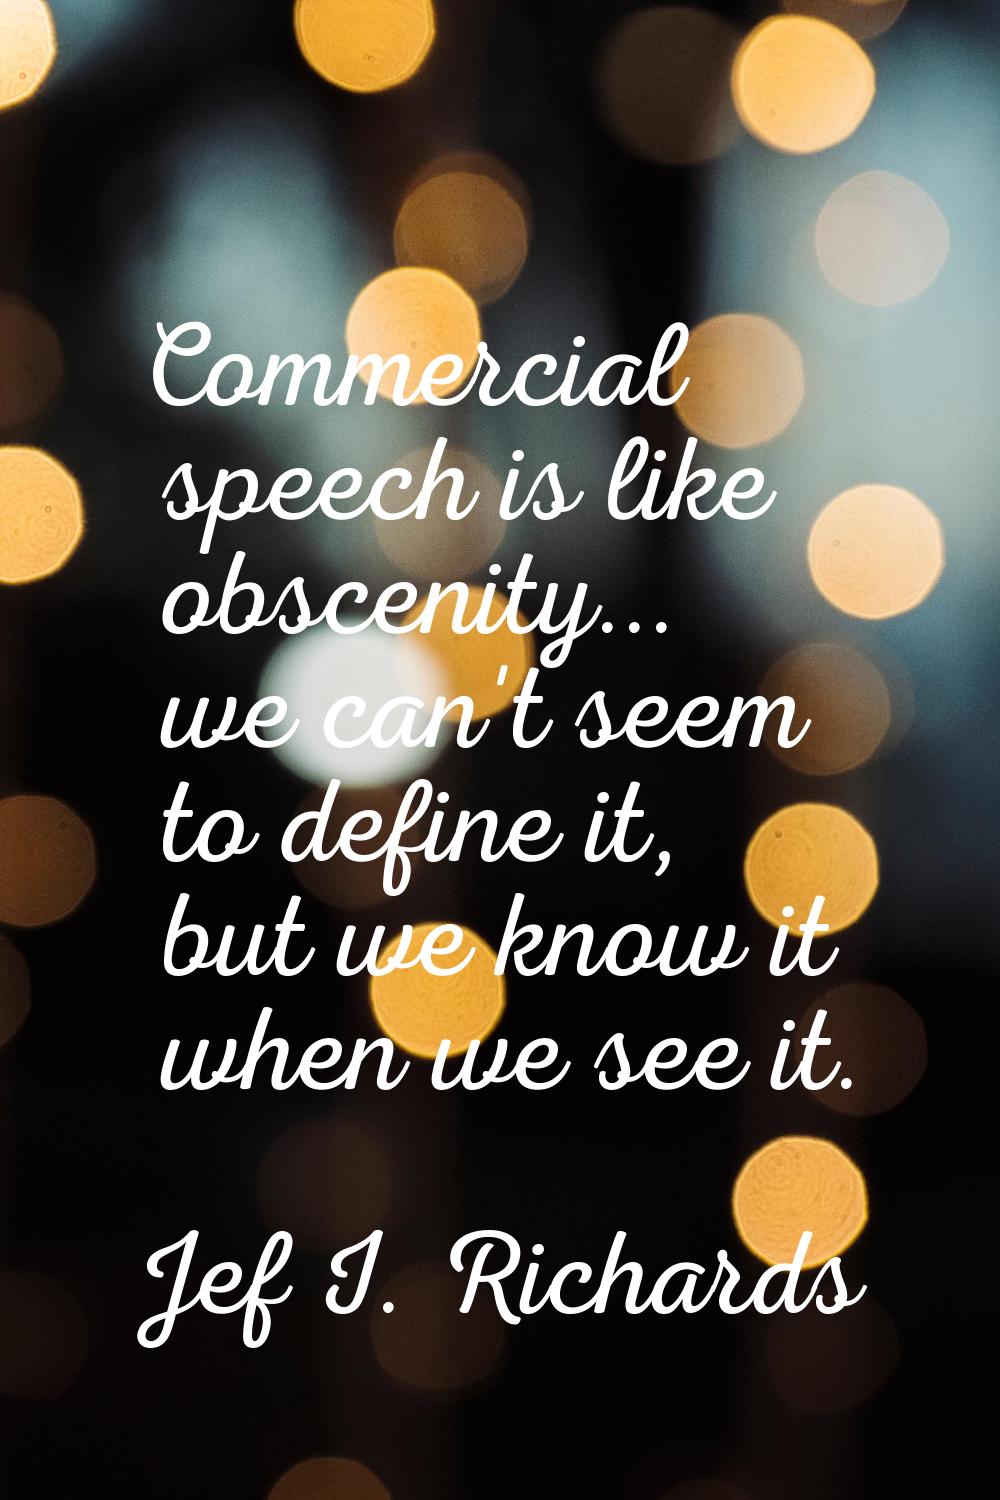 Commercial speech is like obscenity... we can't seem to define it, but we know it when we see it.